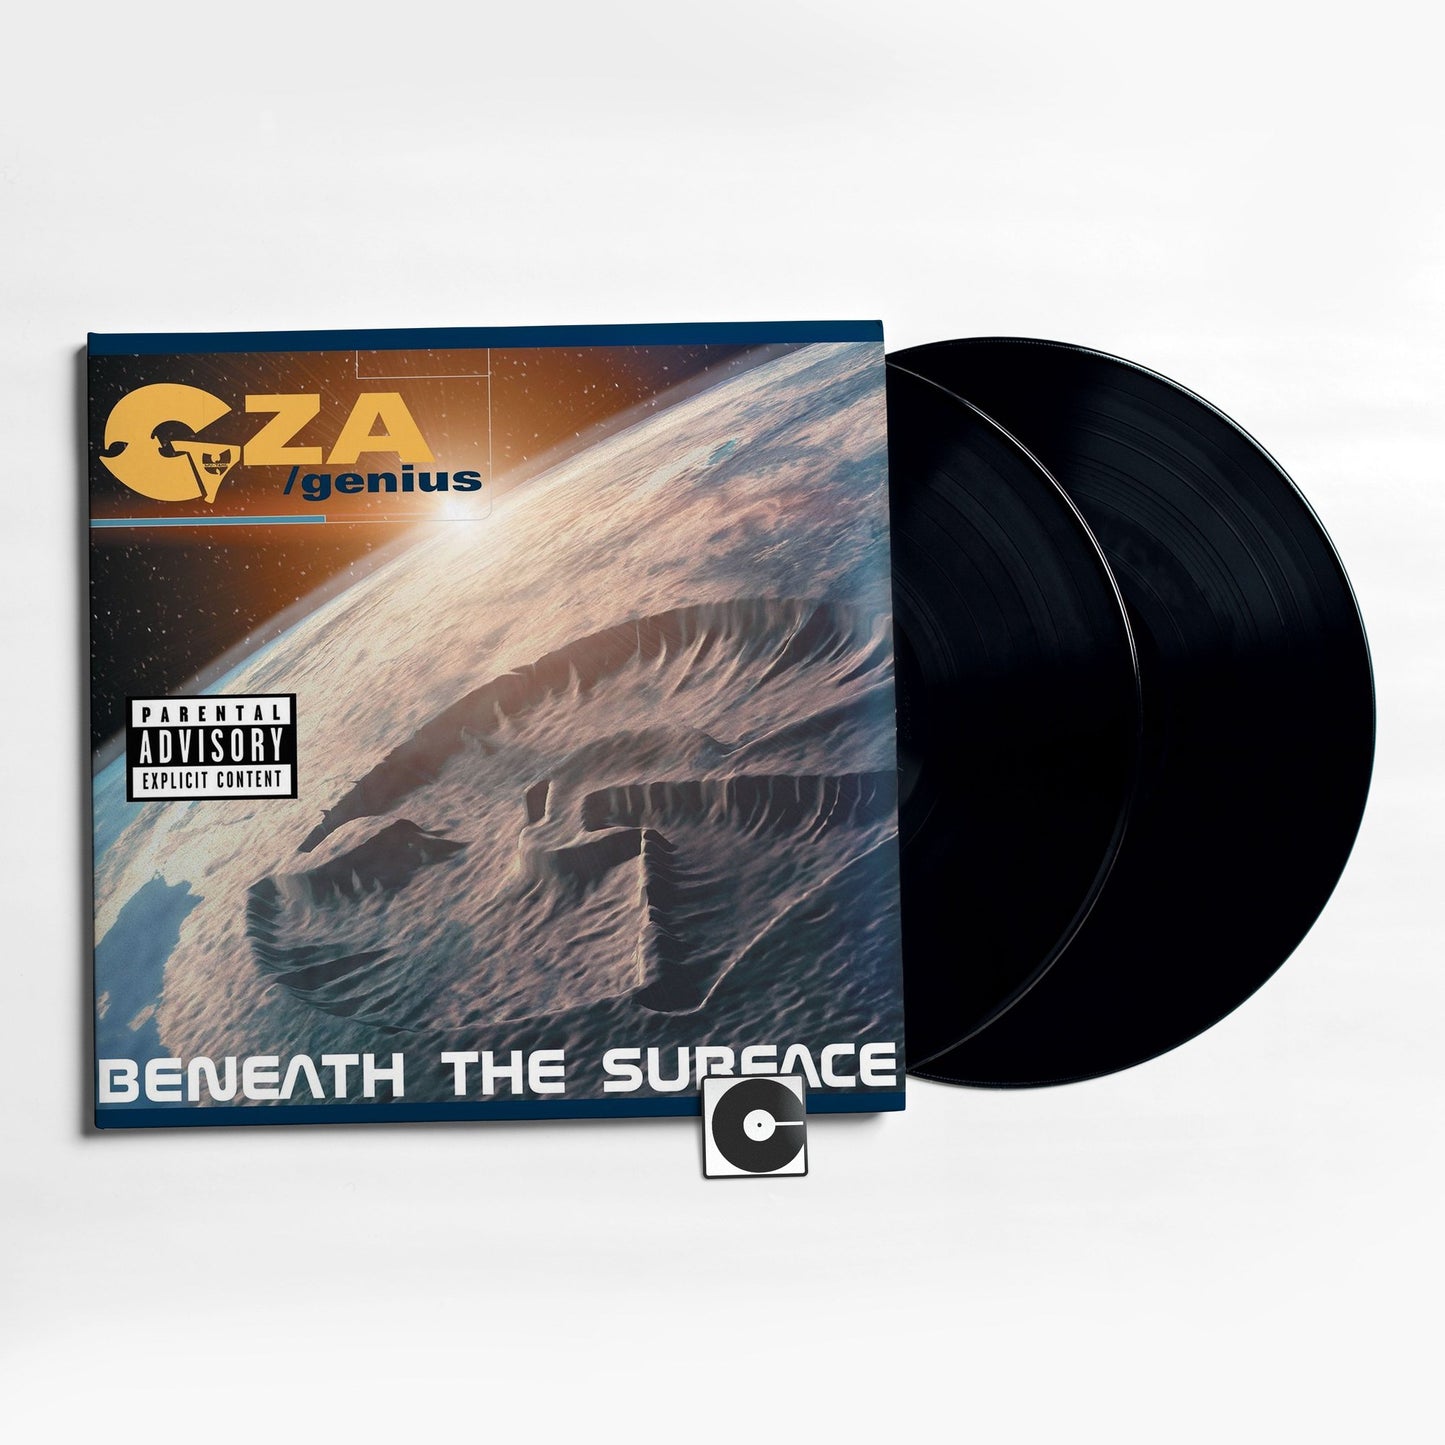 GZA - "Beneath The Surface"